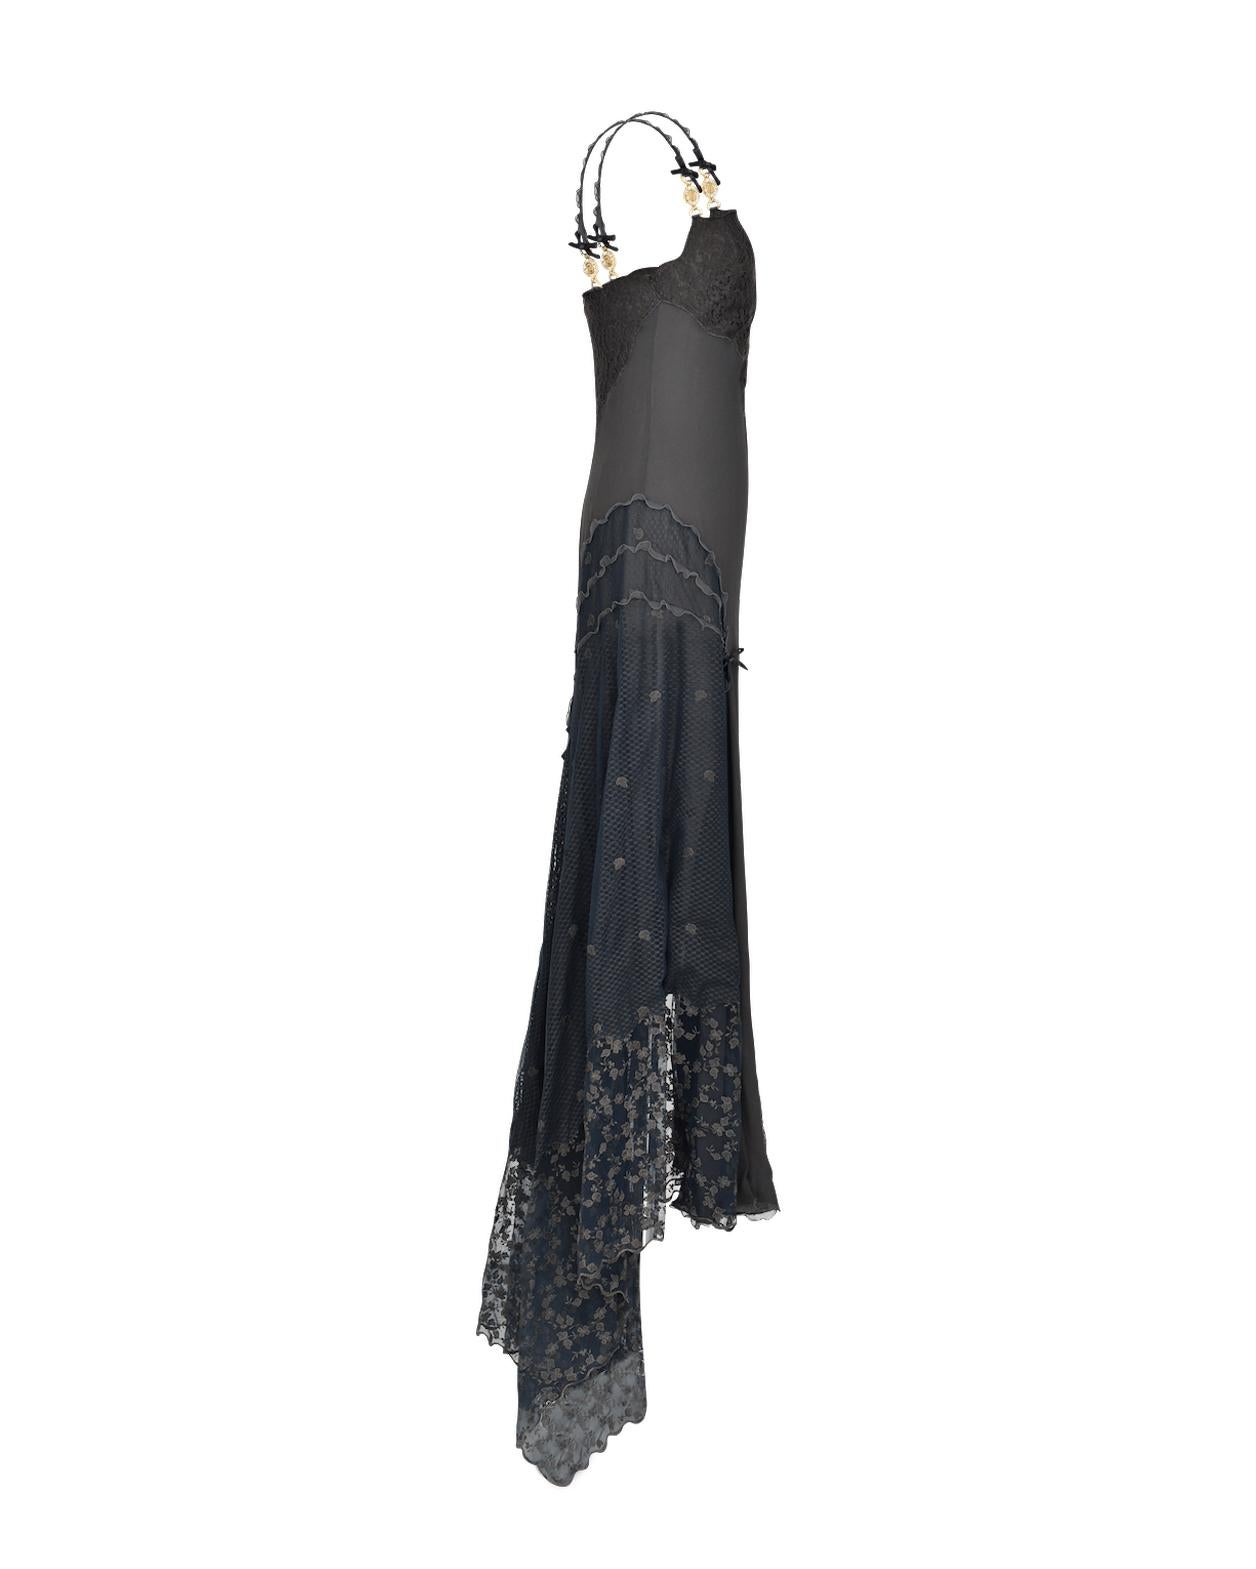 S/S 1997 Gianni Versace Couture Charcoal Gray Lace Gown In Good Condition In North Hollywood, CA